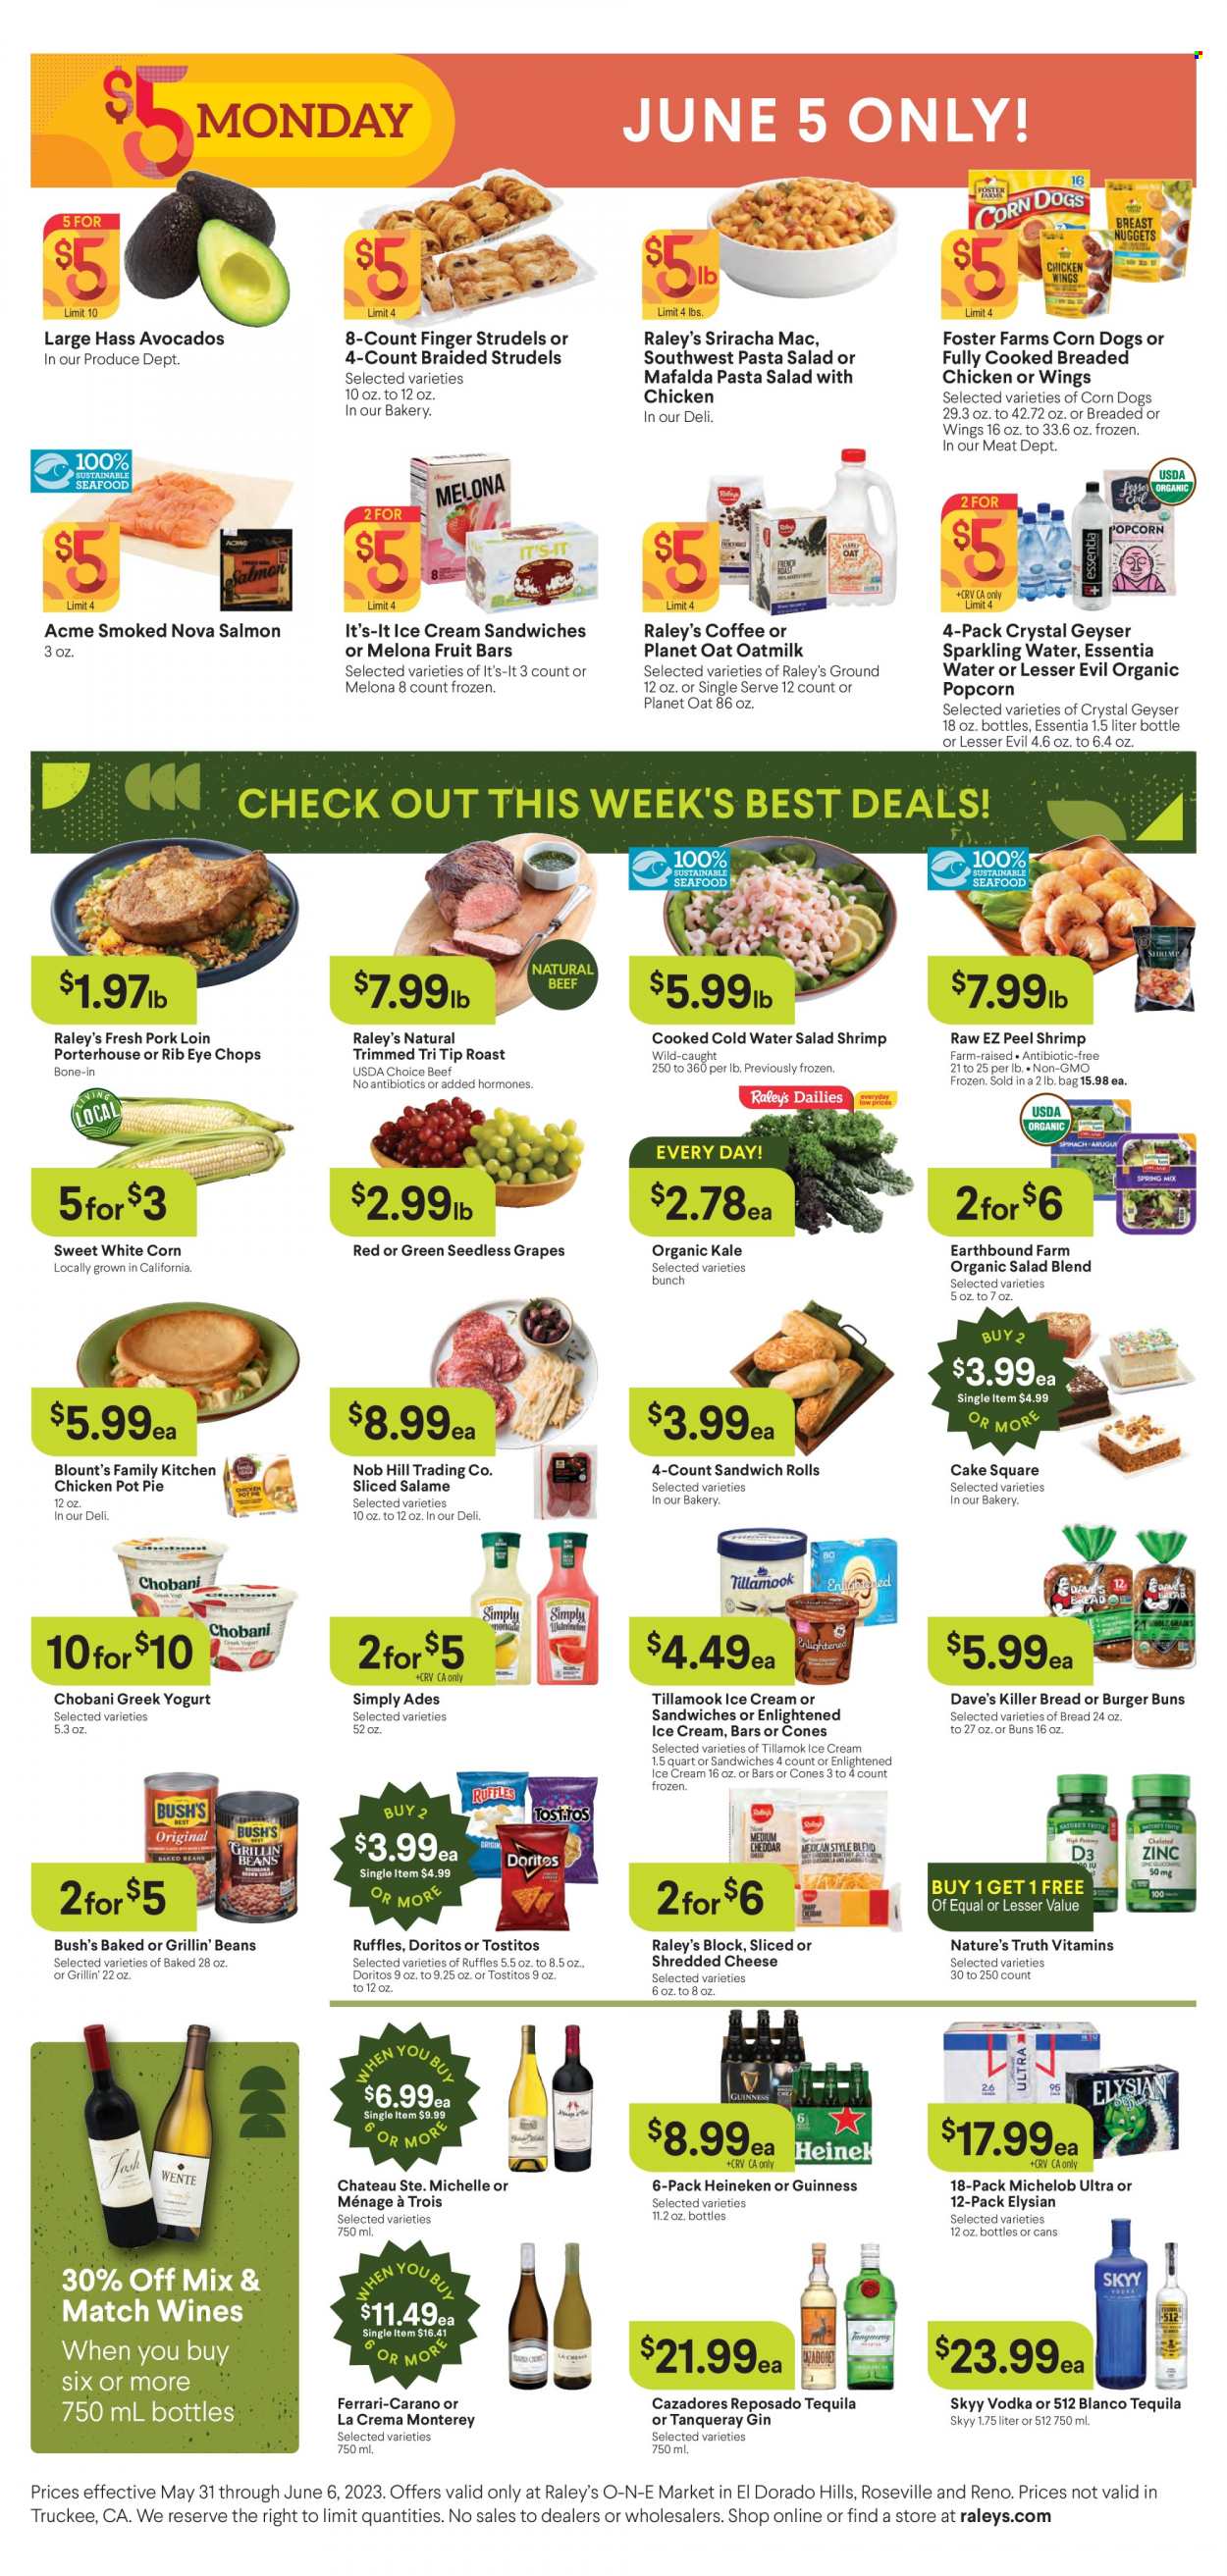 thumbnail - Raley's Flyer - 05/31/2023 - 06/06/2023 - Sales products - bread, cake, pie, buns, burger buns, sandwich rolls, pot pie, kale, avocado, grapes, seedless grapes, salmon, shrimps, pasta, fried chicken, roast, pasta salad, shredded cheese, greek yoghurt, Chobani, oat milk, ice cream, ice cream sandwich, Enlightened lce Cream, fruit bar, Doritos, popcorn, Ruffles, Tostitos, salty snack, baked beans, sriracha, sparkling water, water, gin, tequila, vodka, SKYY, beer, Heineken, Guinness, beef meat, pork loin, pork meat, Nature's Truth, Michelob. Page 2.